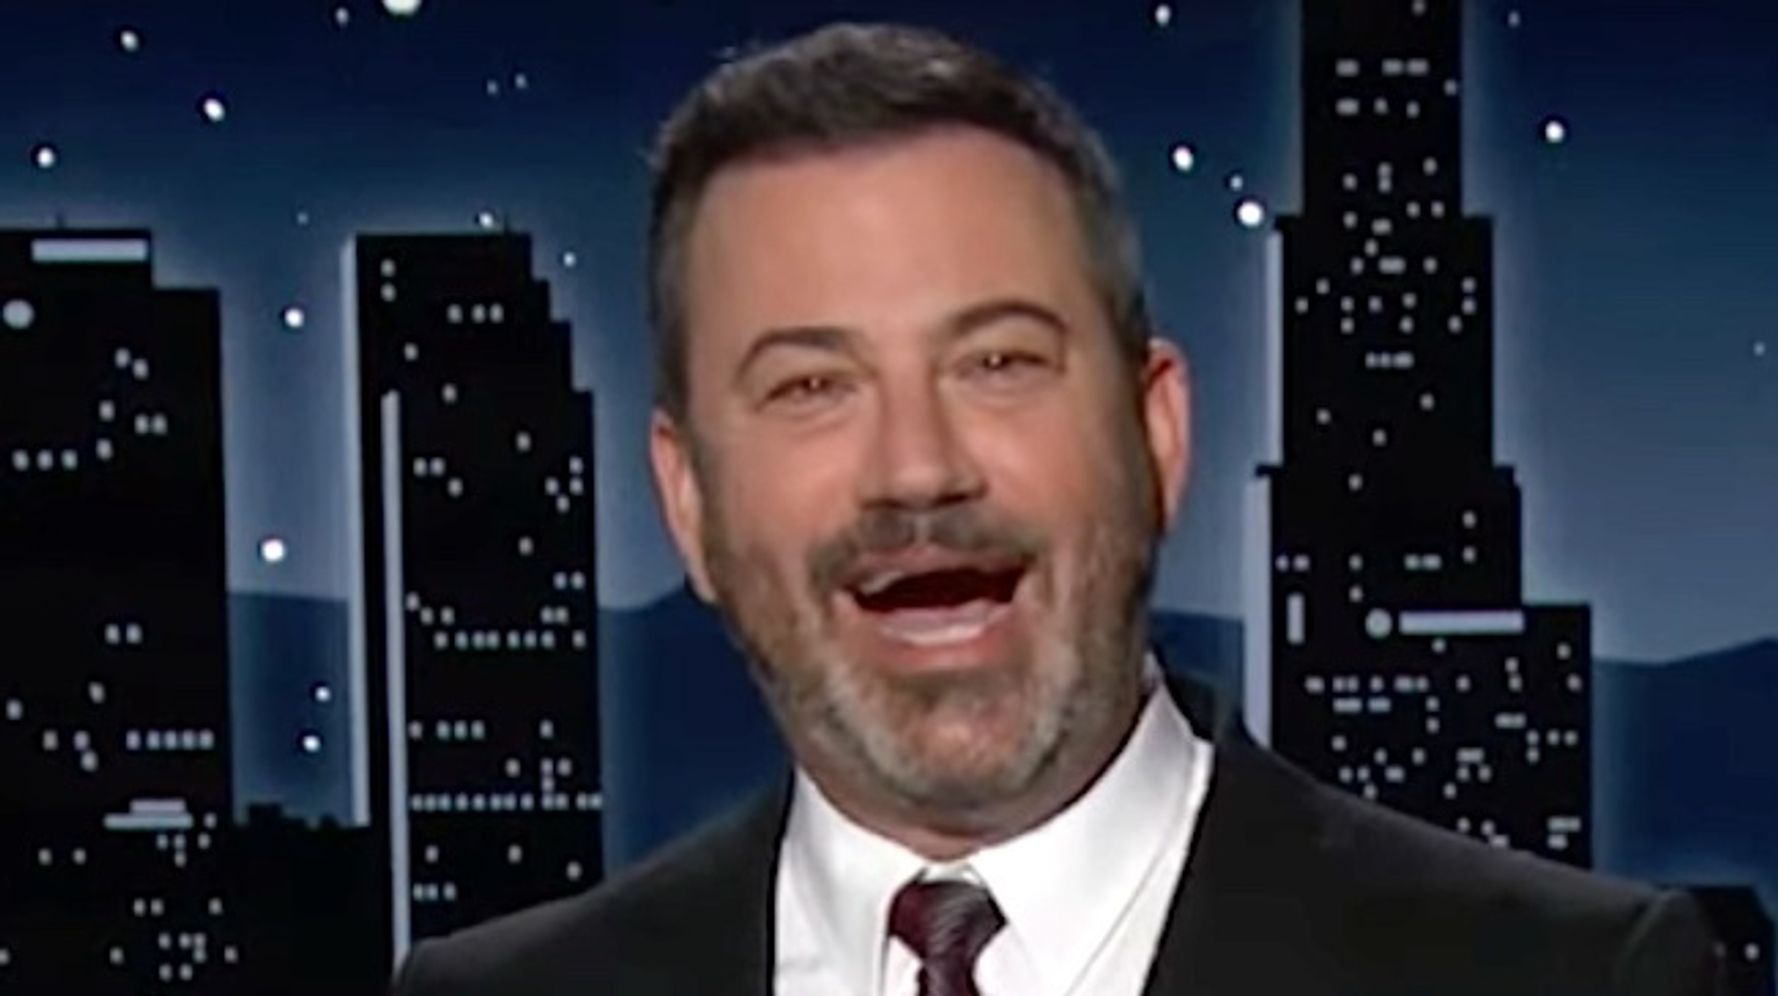 Jimmy Kimmel Spots What Bothered Trump 'More Than Losing The Election'